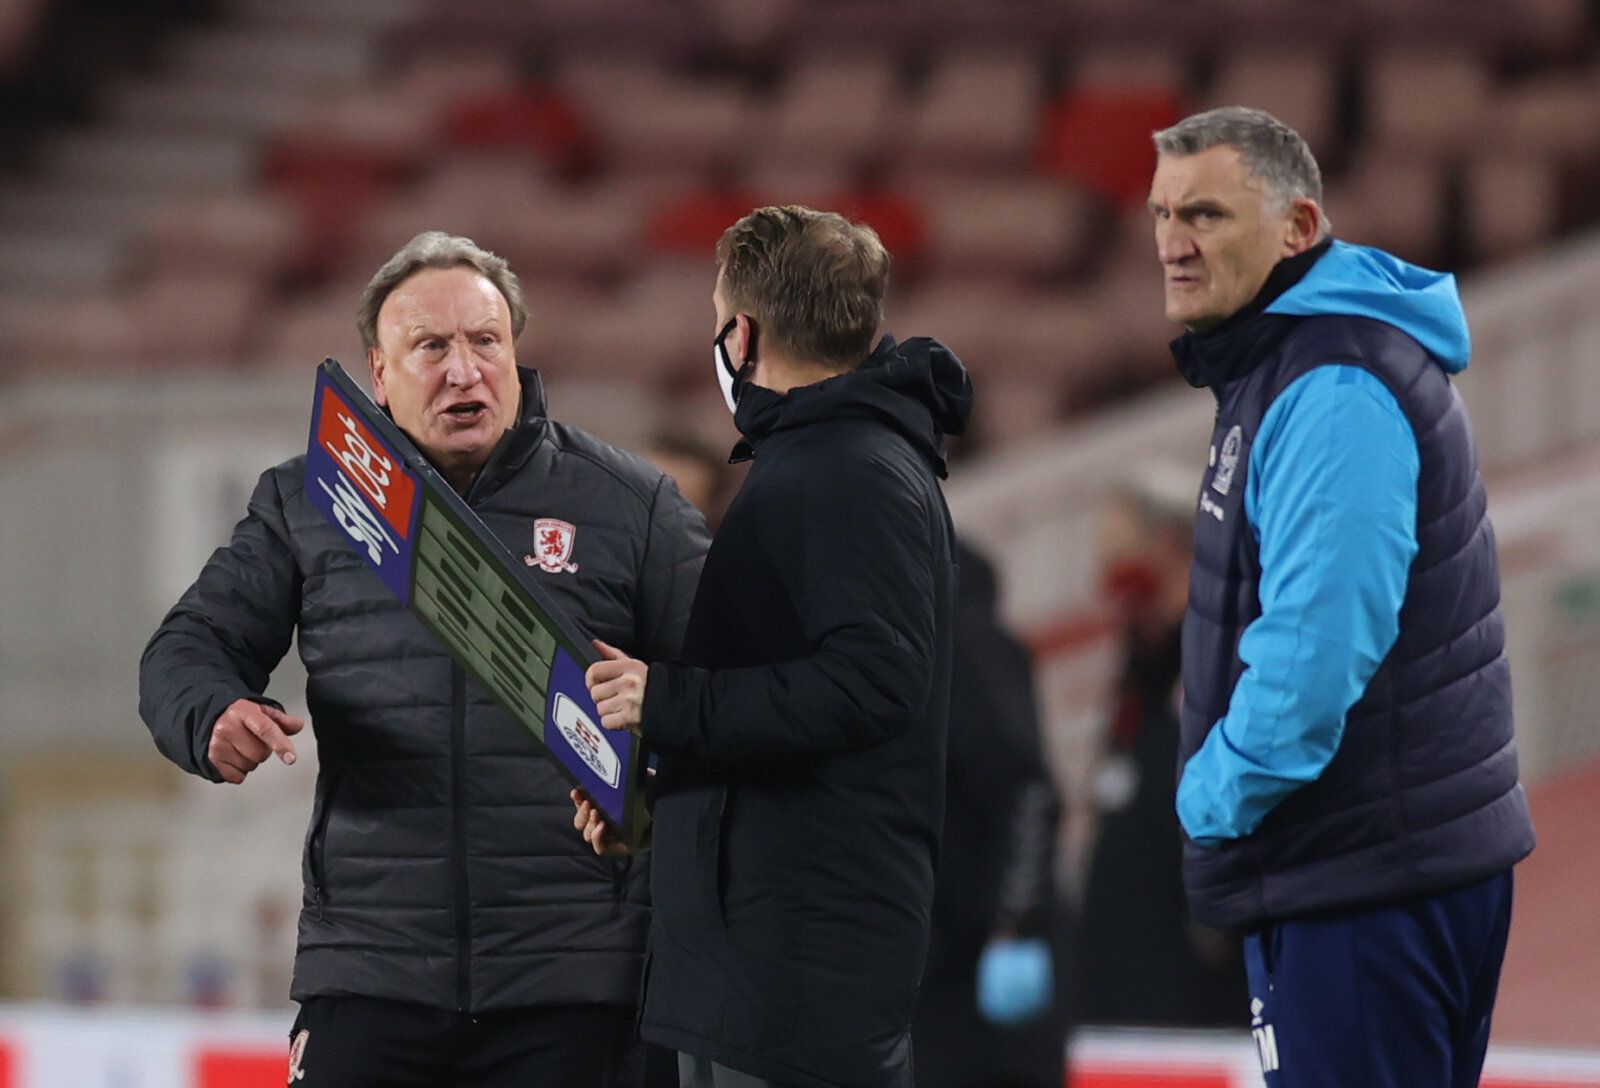 Soccer Football - Championship - Middlesbrough v Blackburn Rovers - Riverside Stadium, Middlesbrough, Britain - January 24, 2021 Middlesbrough manager Neil Warnock remonstrates with the fourth official alongside Blackburn Rovers manager Tony Mowbray Action Images/Lee Smith